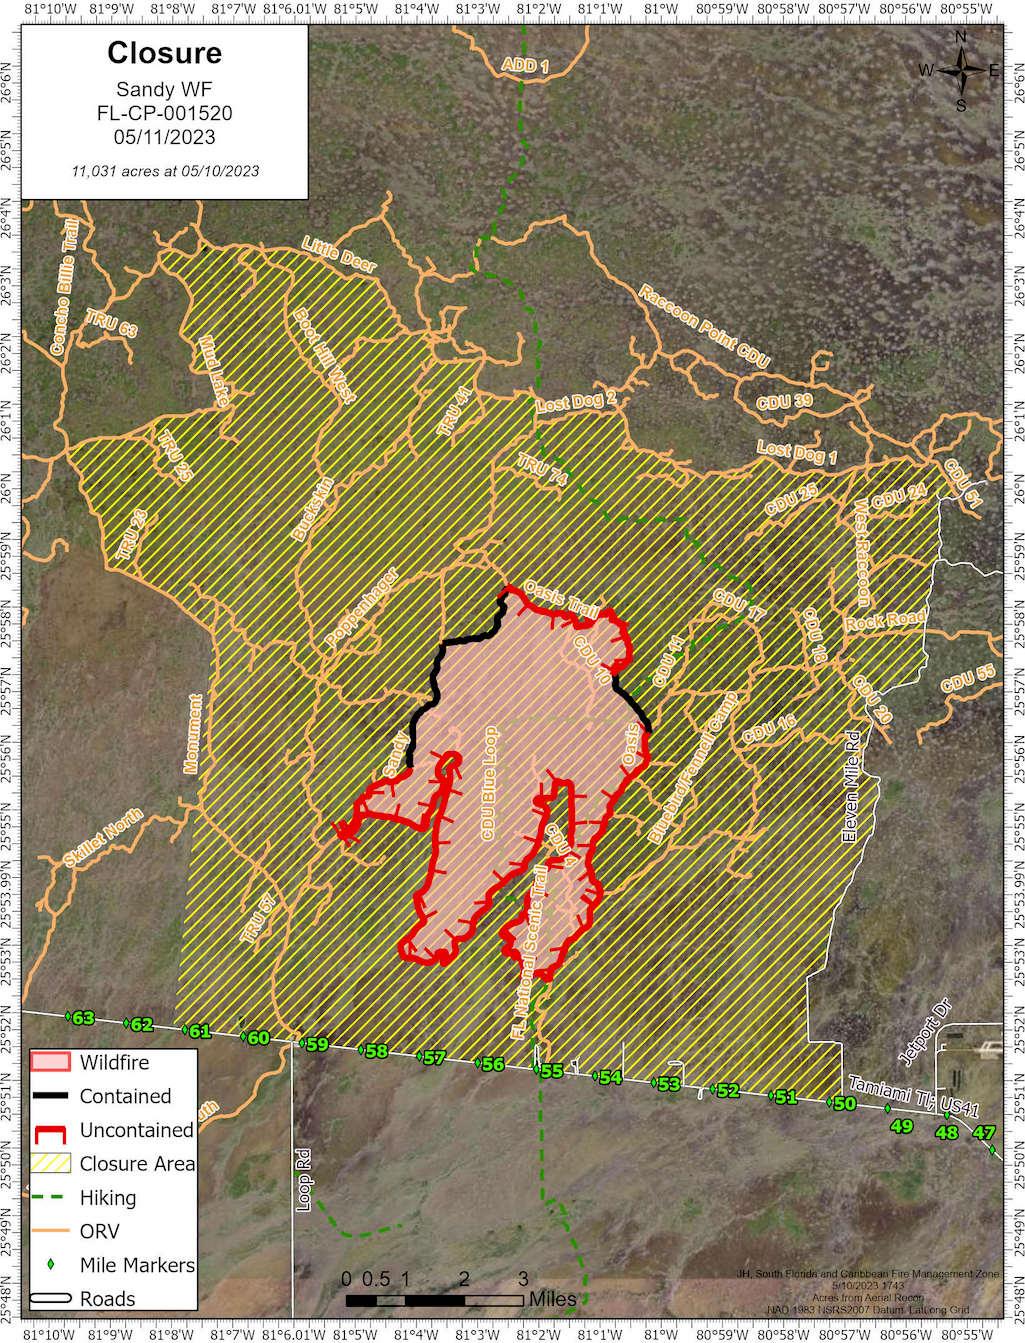 Sandy wildfire map from Big Cypress National Preserve/NPS